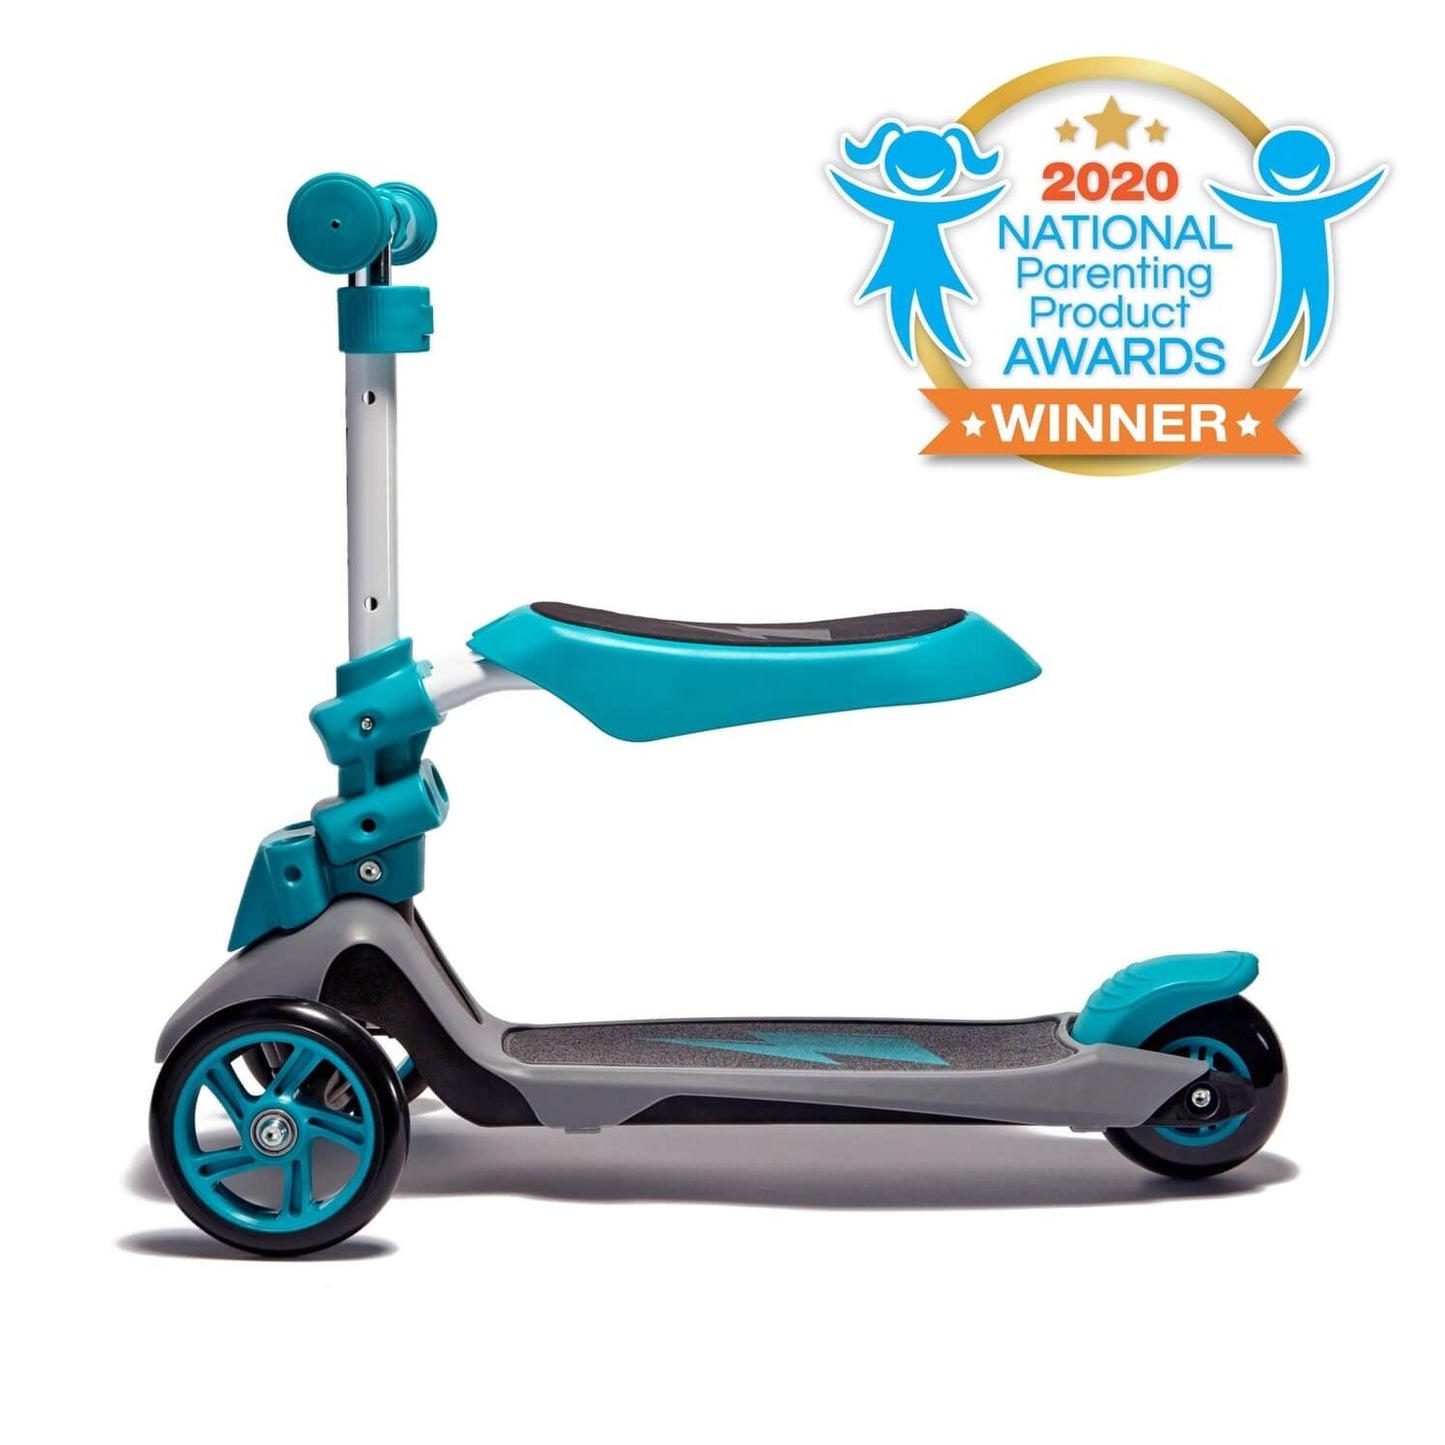 Award winning Svolta Ace 2-in-1 Toddler Scooter Ride On Teal Grey Front Side Seat Sit Mode